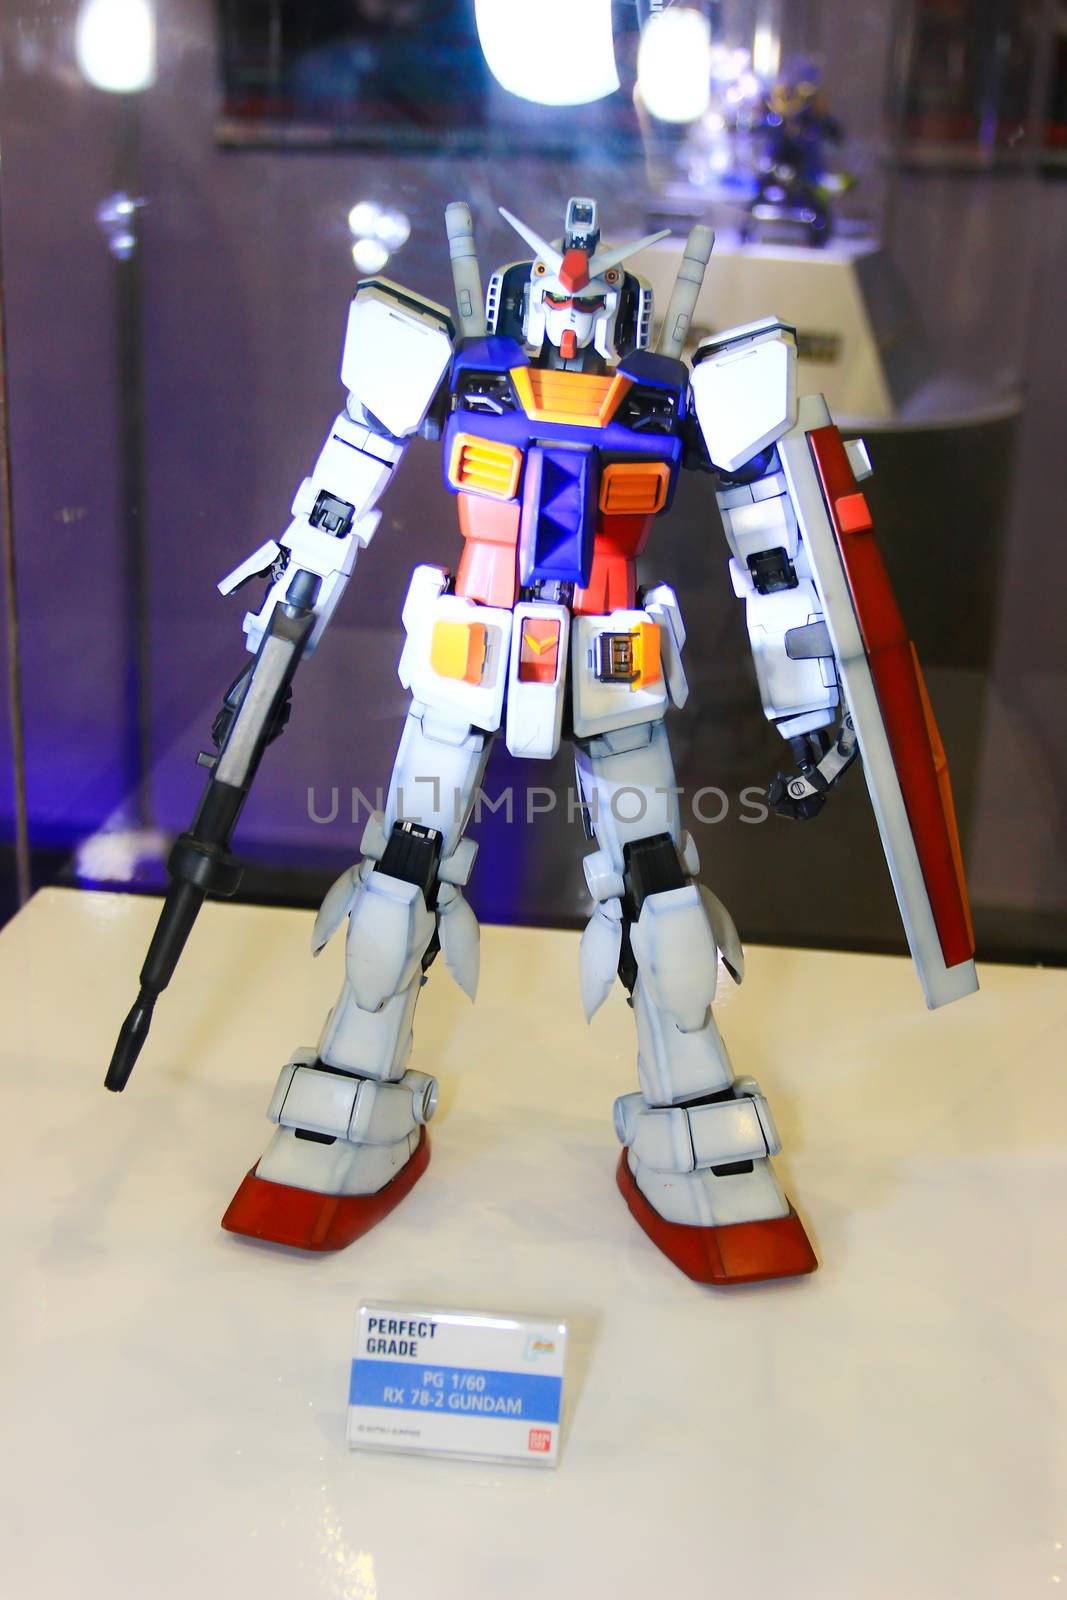 A model of the character Gundam from the movies and comics 7 by redthirteen